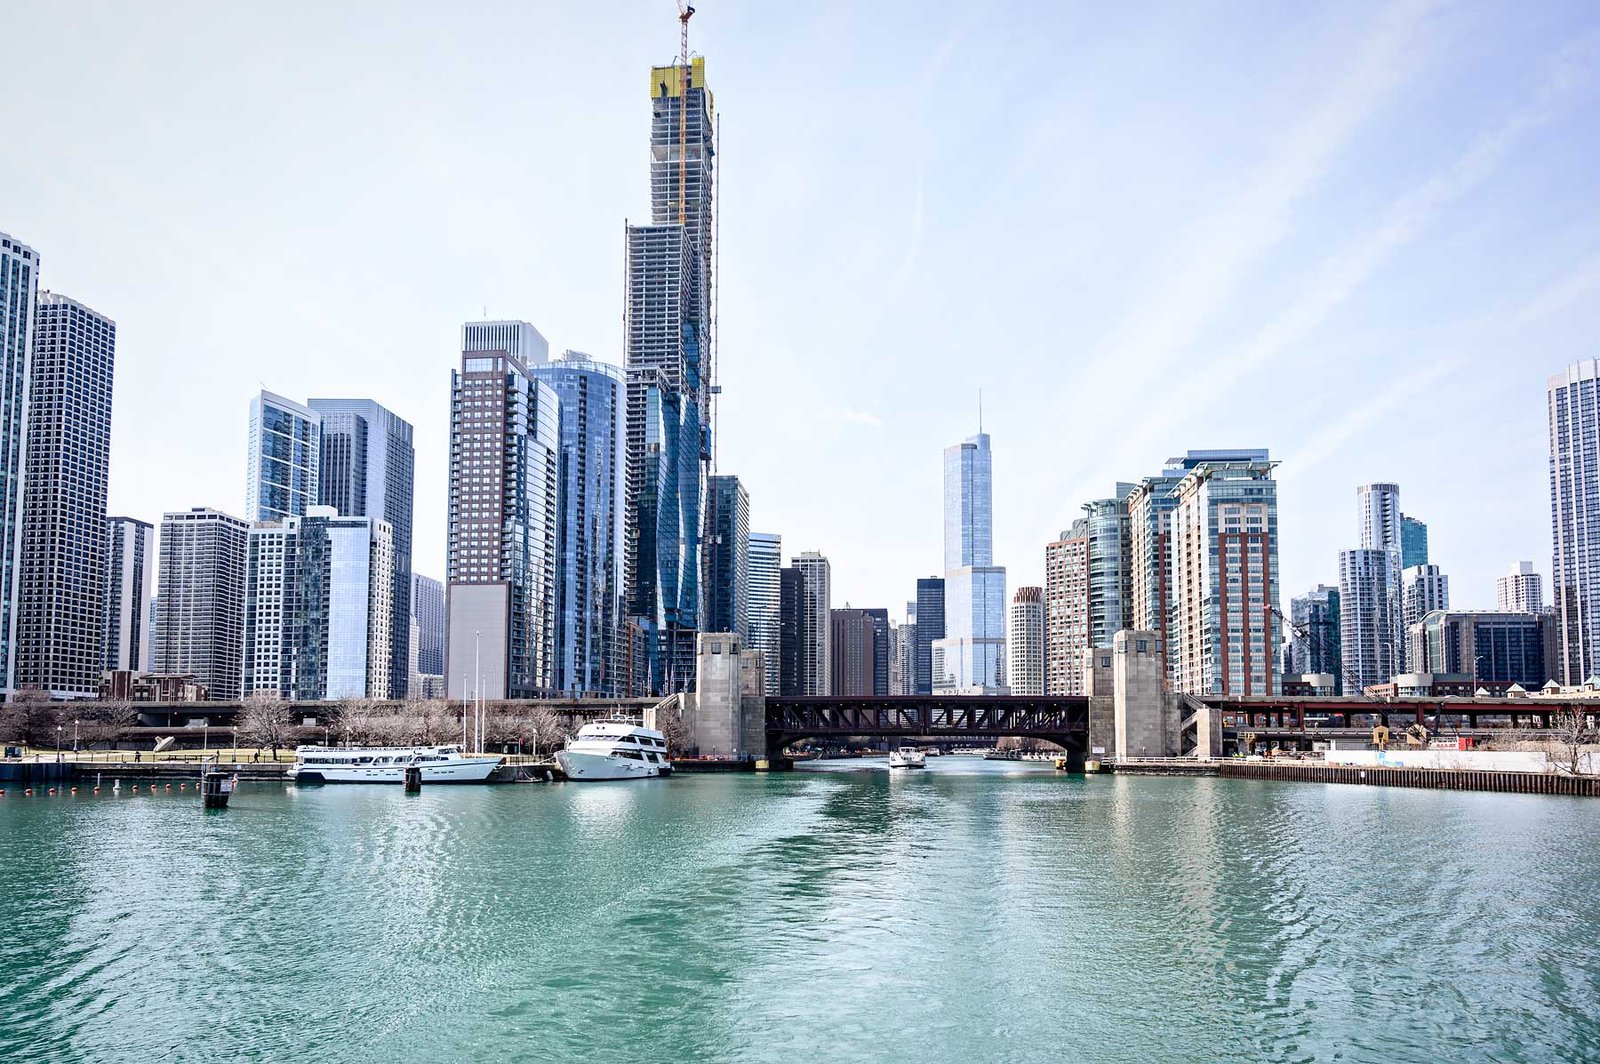 Chicago Architecture Center River Cruise. The 15 Best Things to Do and See in Chicago